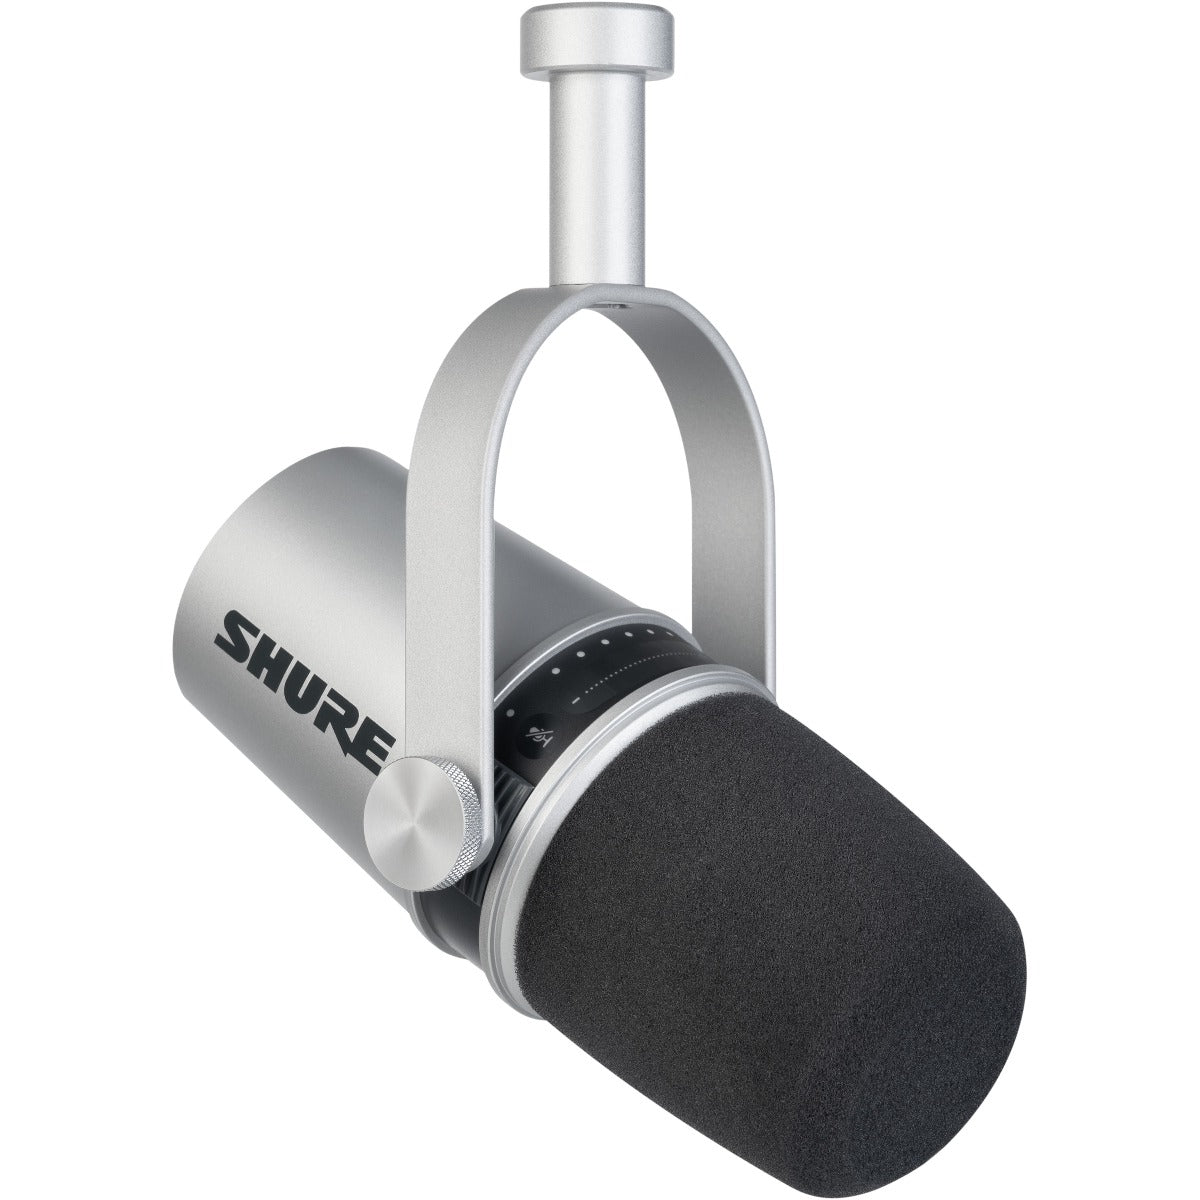 3/4 view of Shure MV7 Podcast Microphone - Silver with integrated yoke in boom position showing front, top and left side